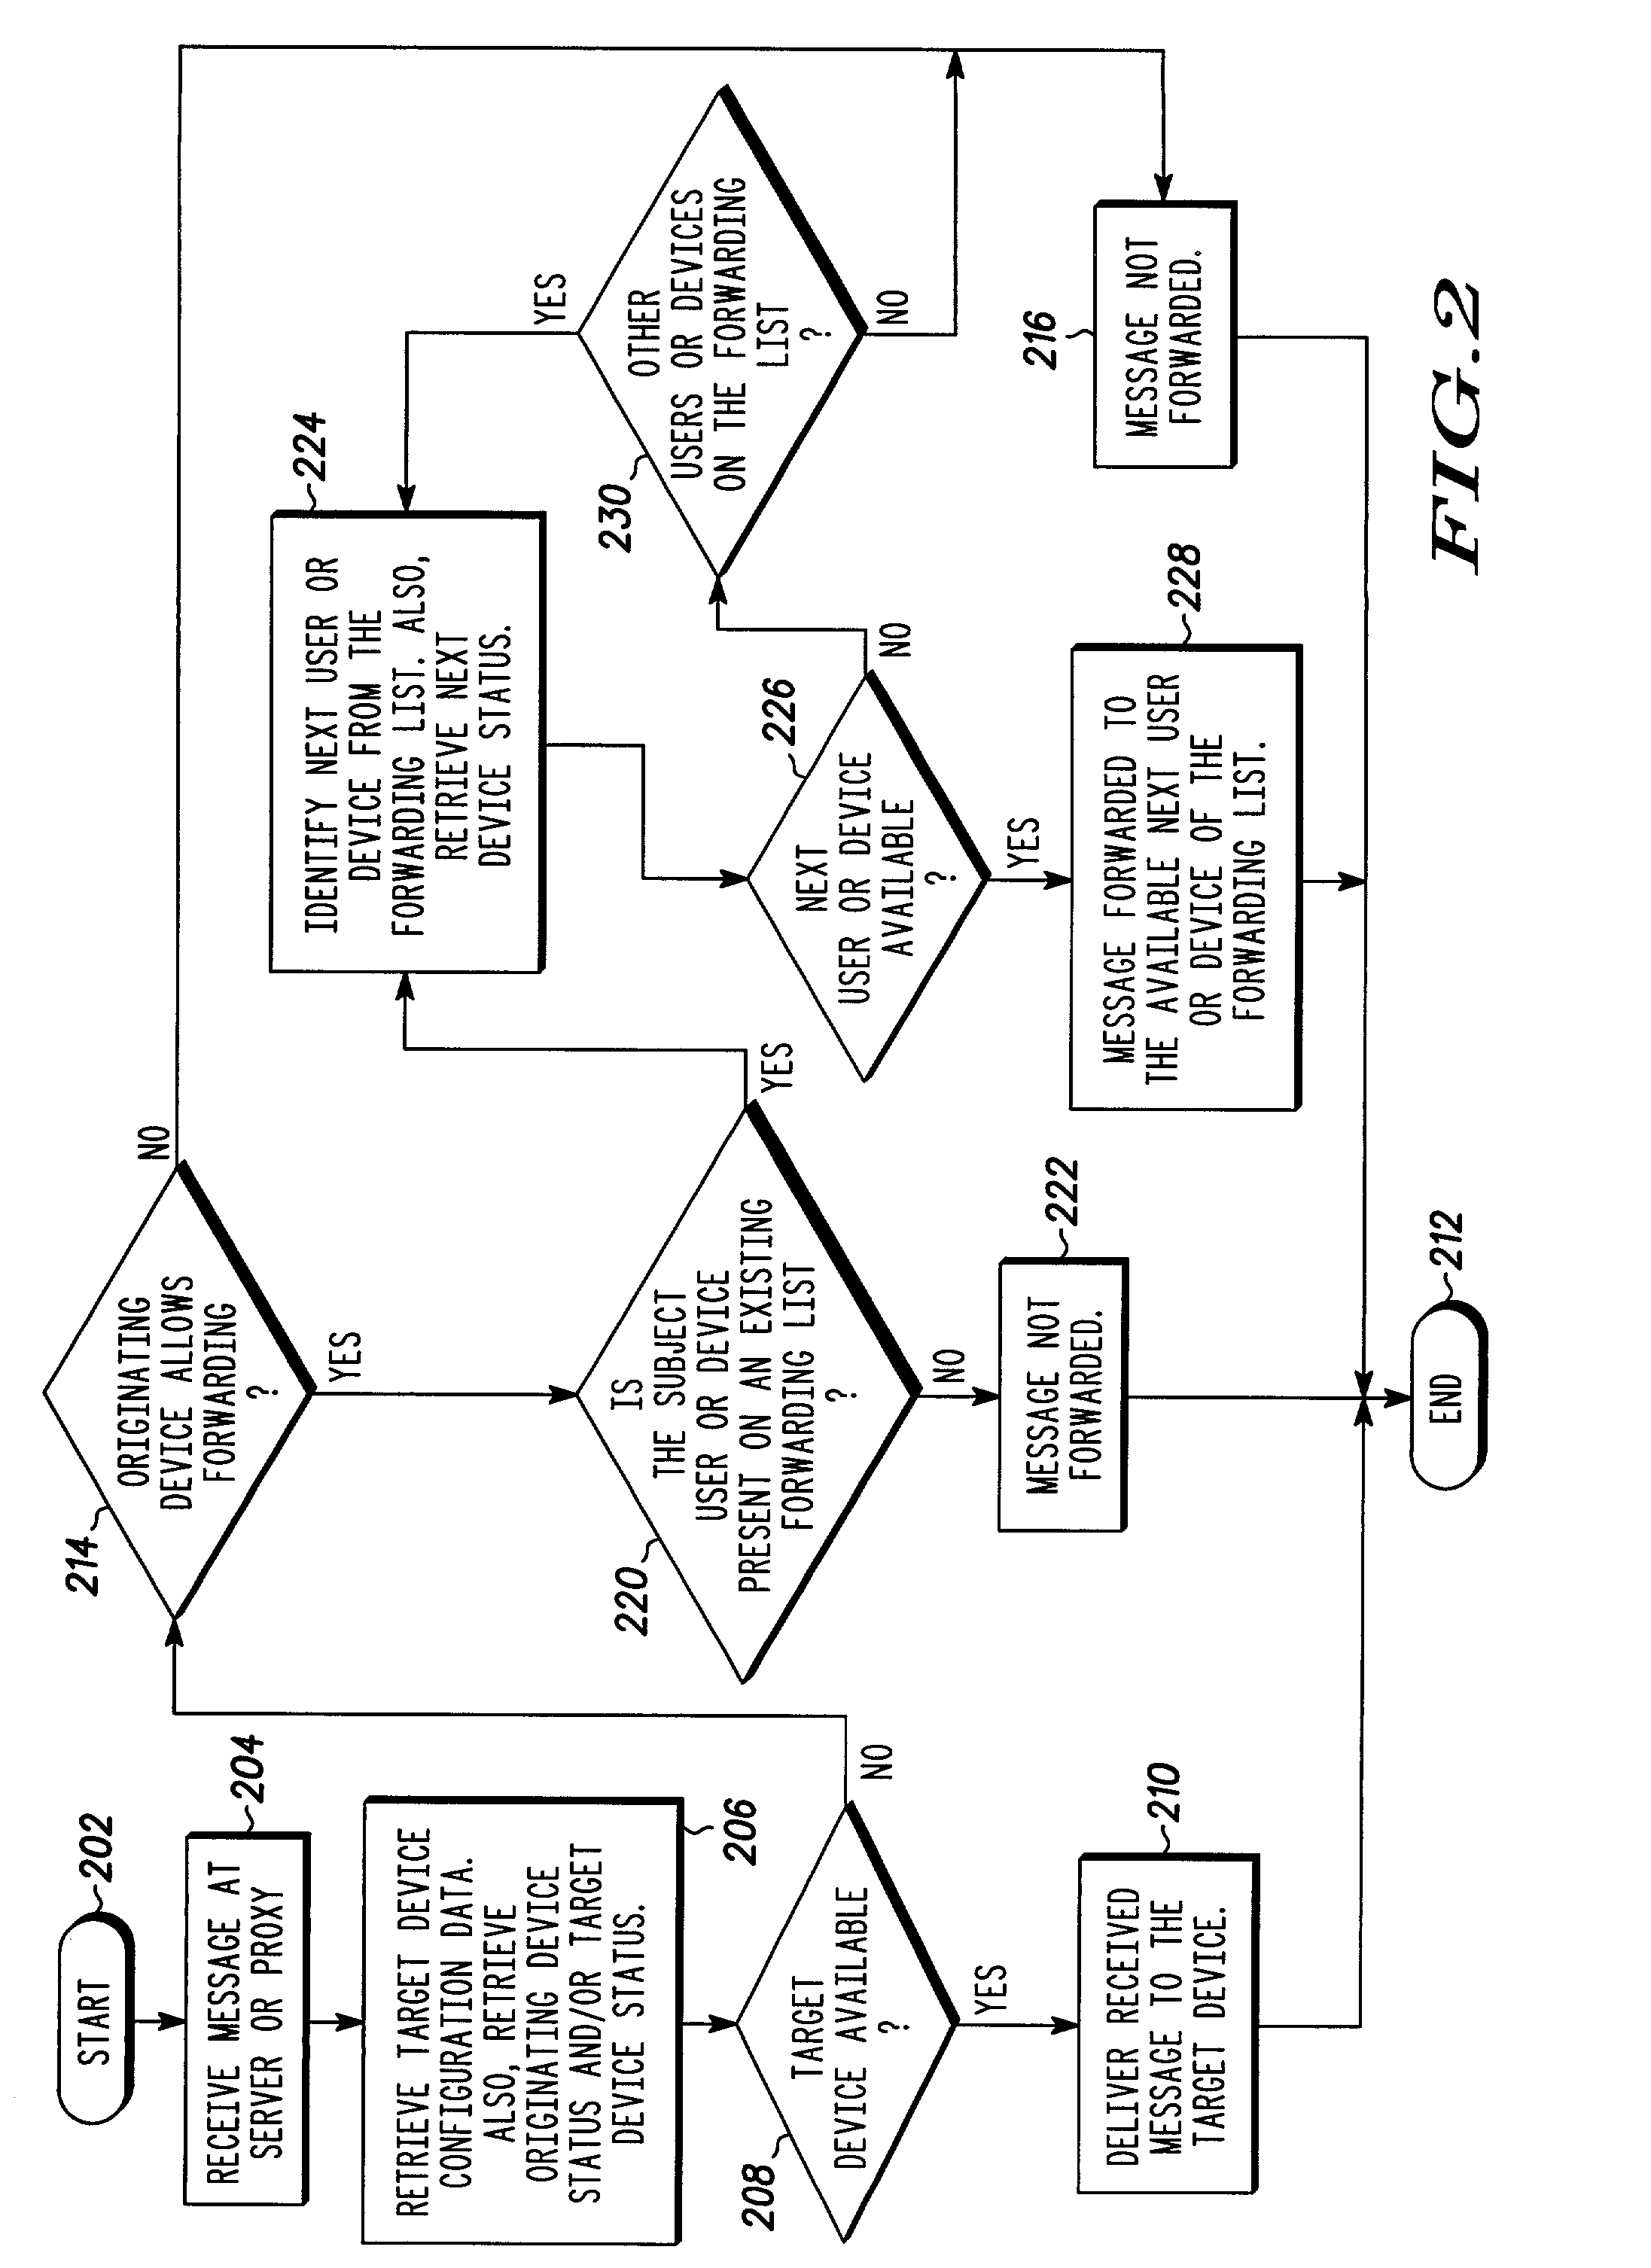 System and method for automatically forwarding a communication message